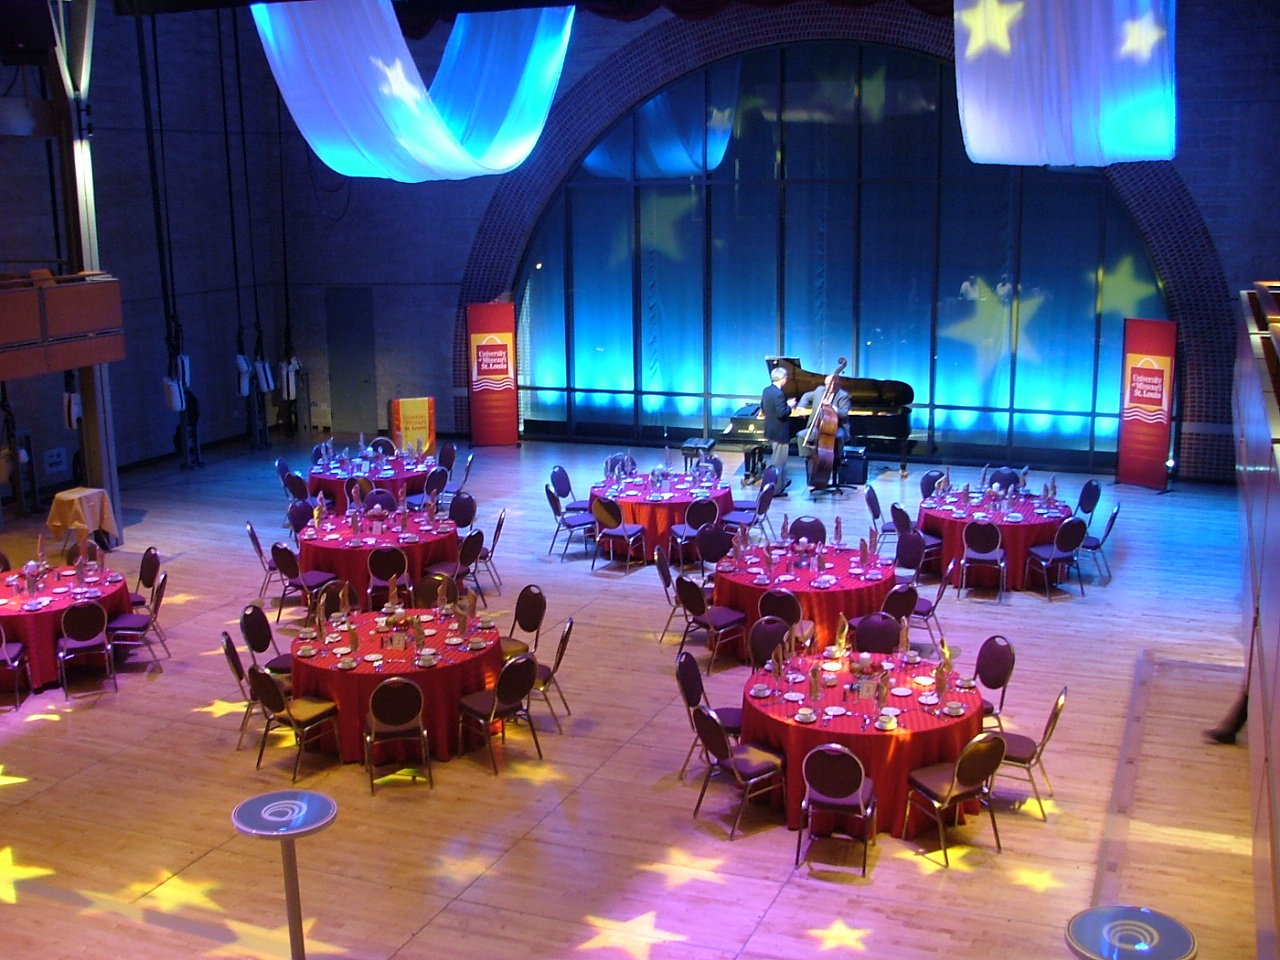 Reception in the Lee Theatre